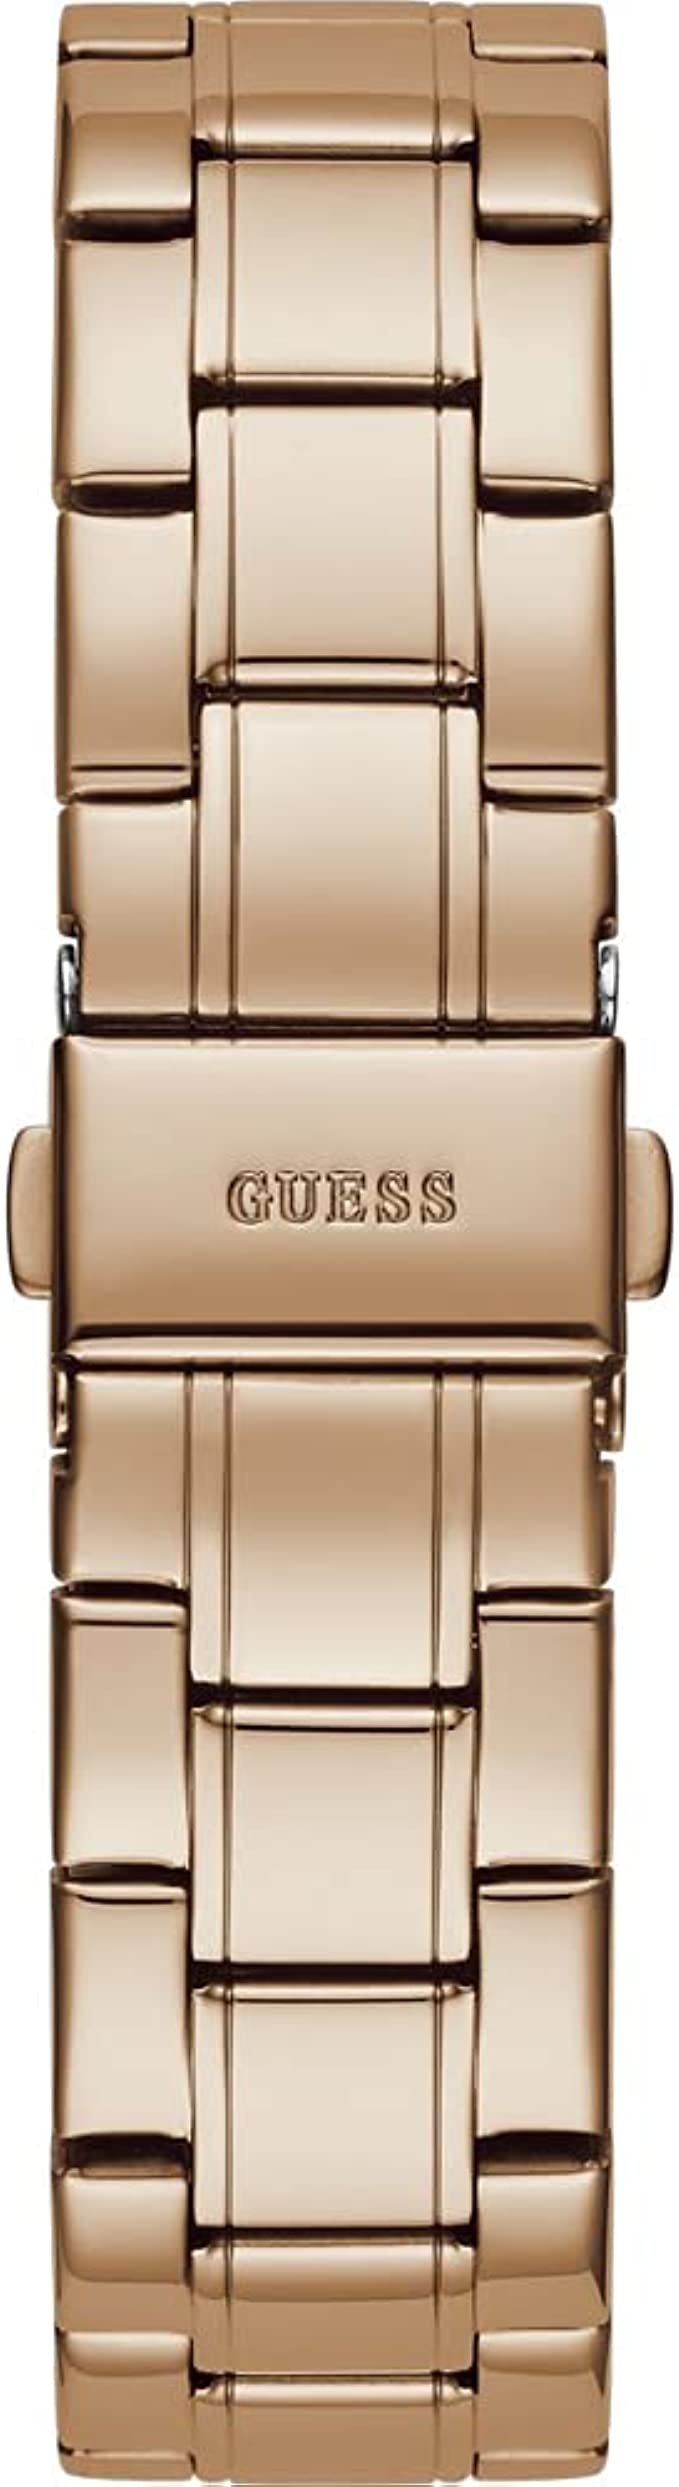 GUESS Women's Quartz Watch with Stainless Steel Strap Women's Watch GW0111L3 - Watches of America #3